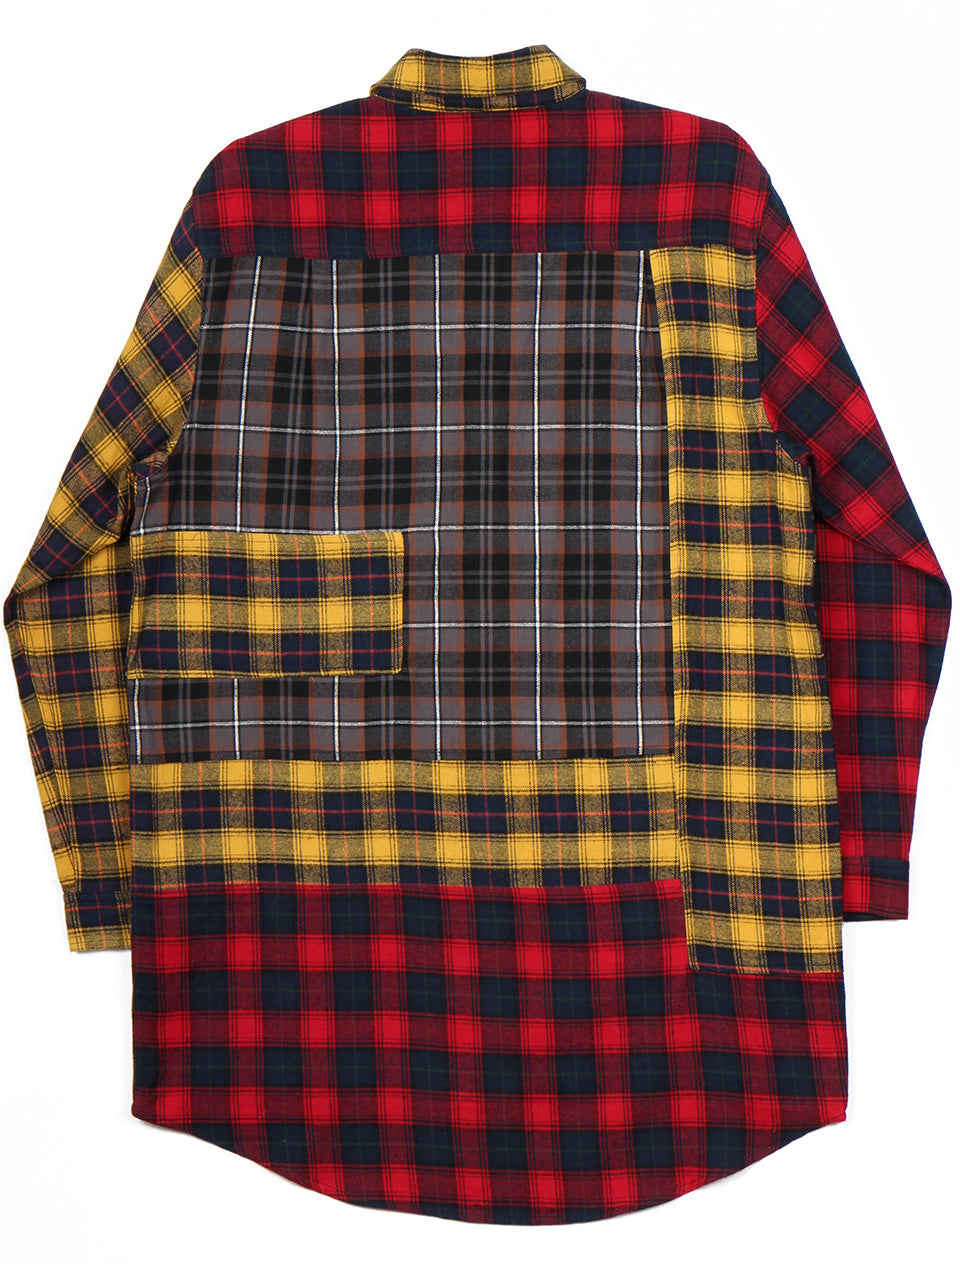 Arial Canopy Checked Panel Shirt (bright check multi)